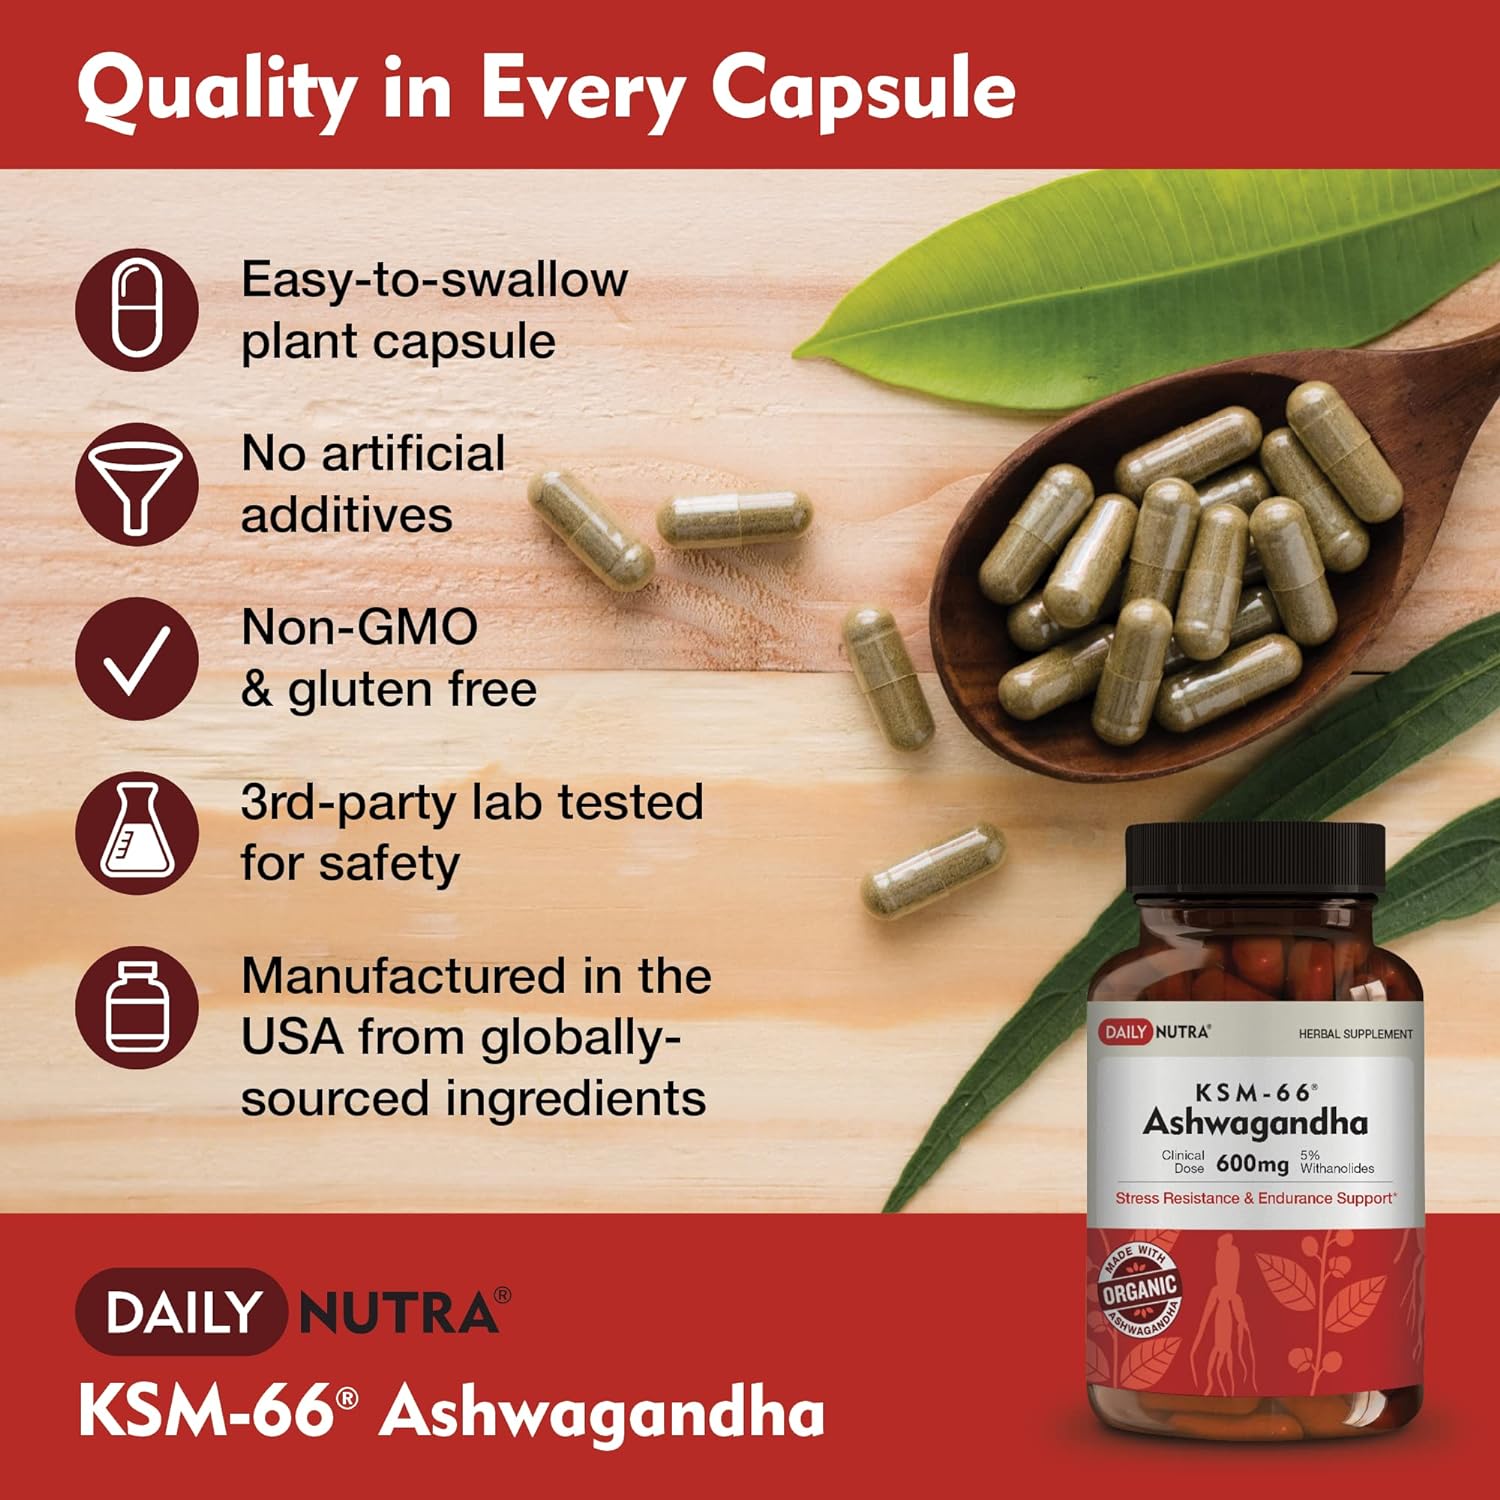 DailyNutra KSM-66 Ashwagandha 600mg Organic Root Extract - High Potency Supplement with 5% Withanolides | Relieves Tiredness, Supports Relaxation, Focus, Energy, & Muscle Growth (60 Capsules) : Health & Household